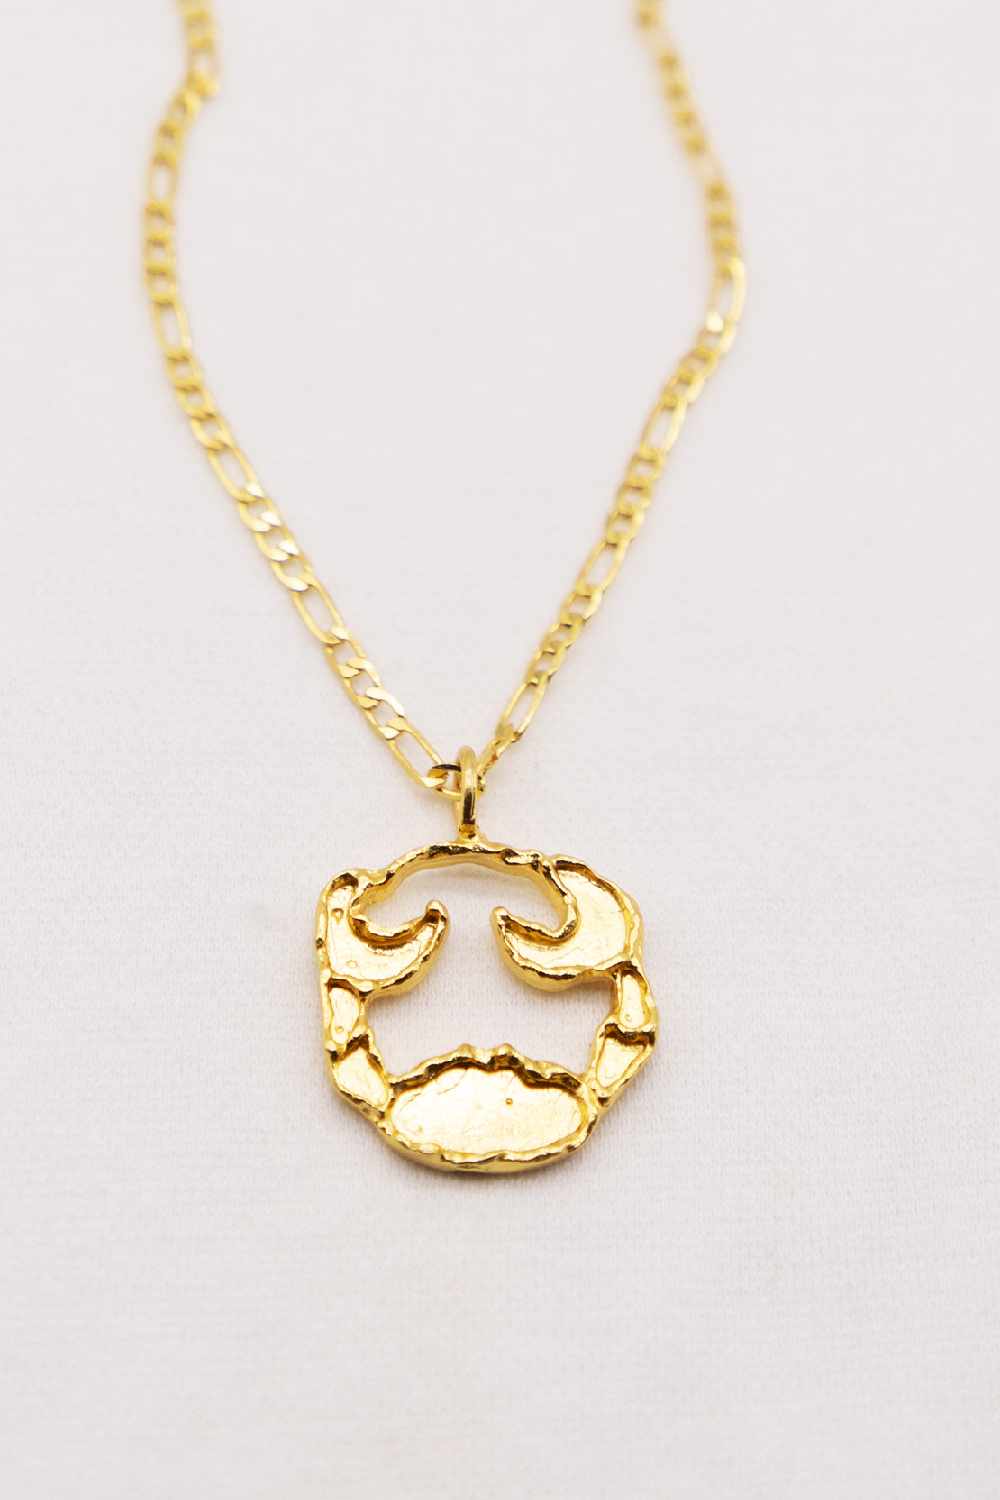 Cancer - 18K Gold Plated Pendant With Anti-Tarnish E-Coating